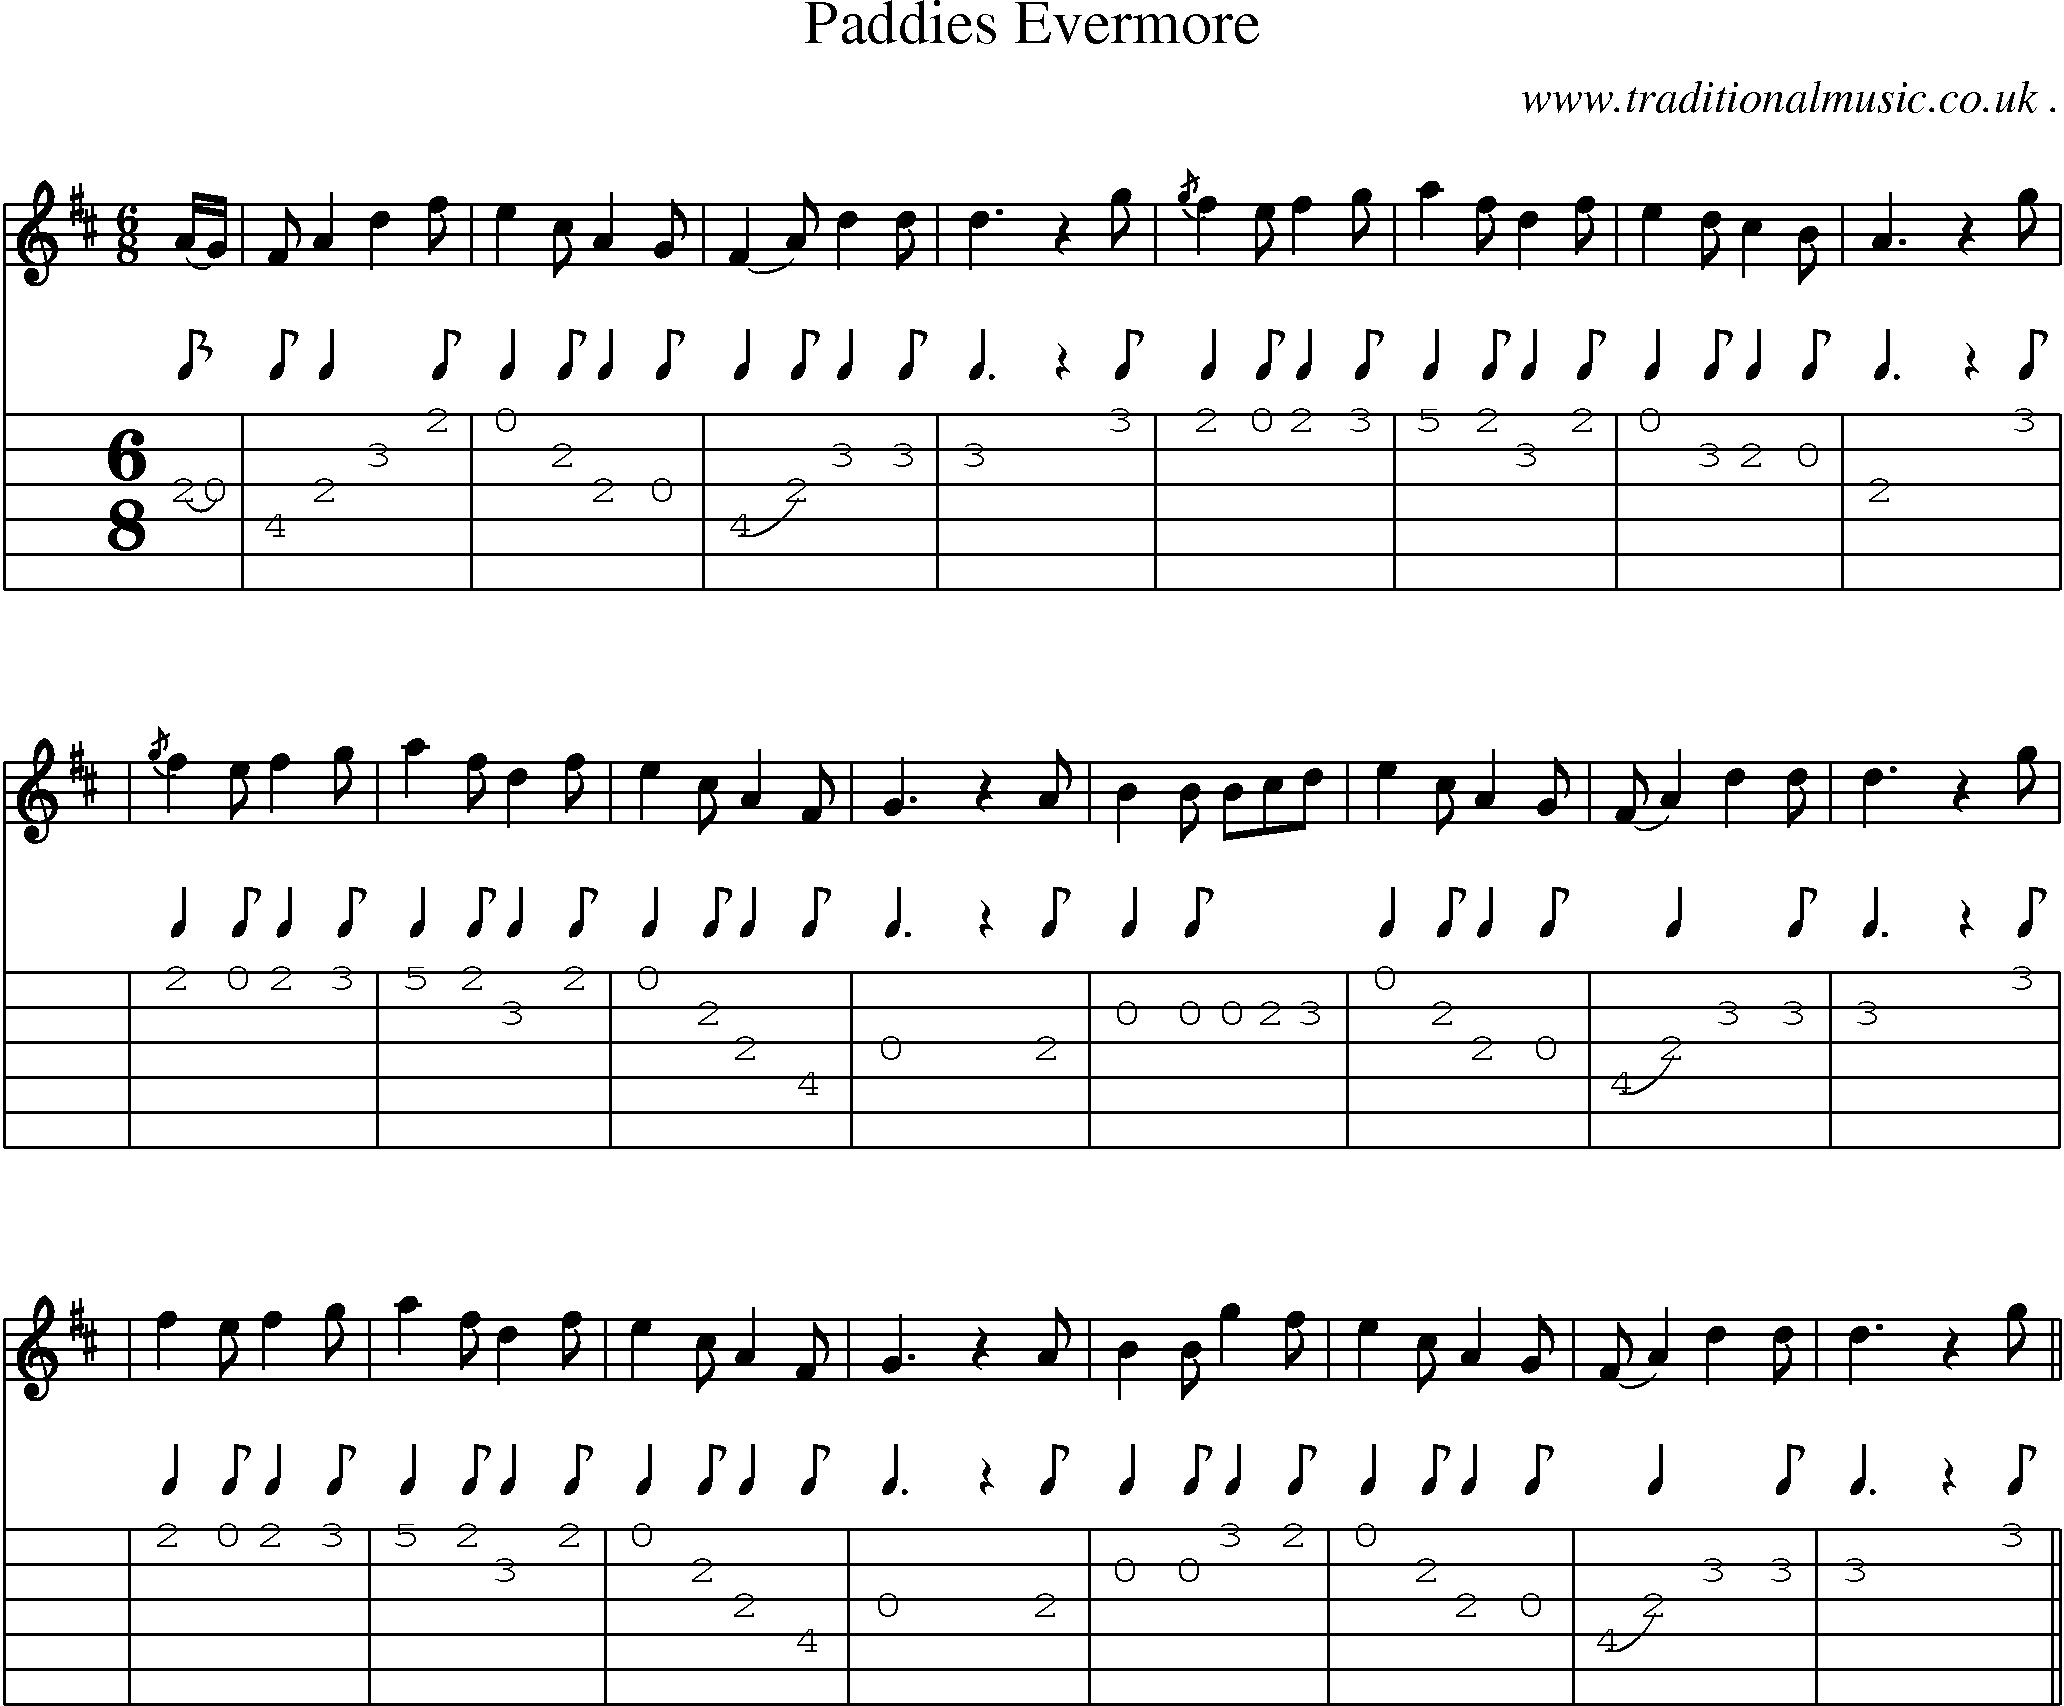 Sheet-music  score, Chords and Guitar Tabs for Paddies Evermore